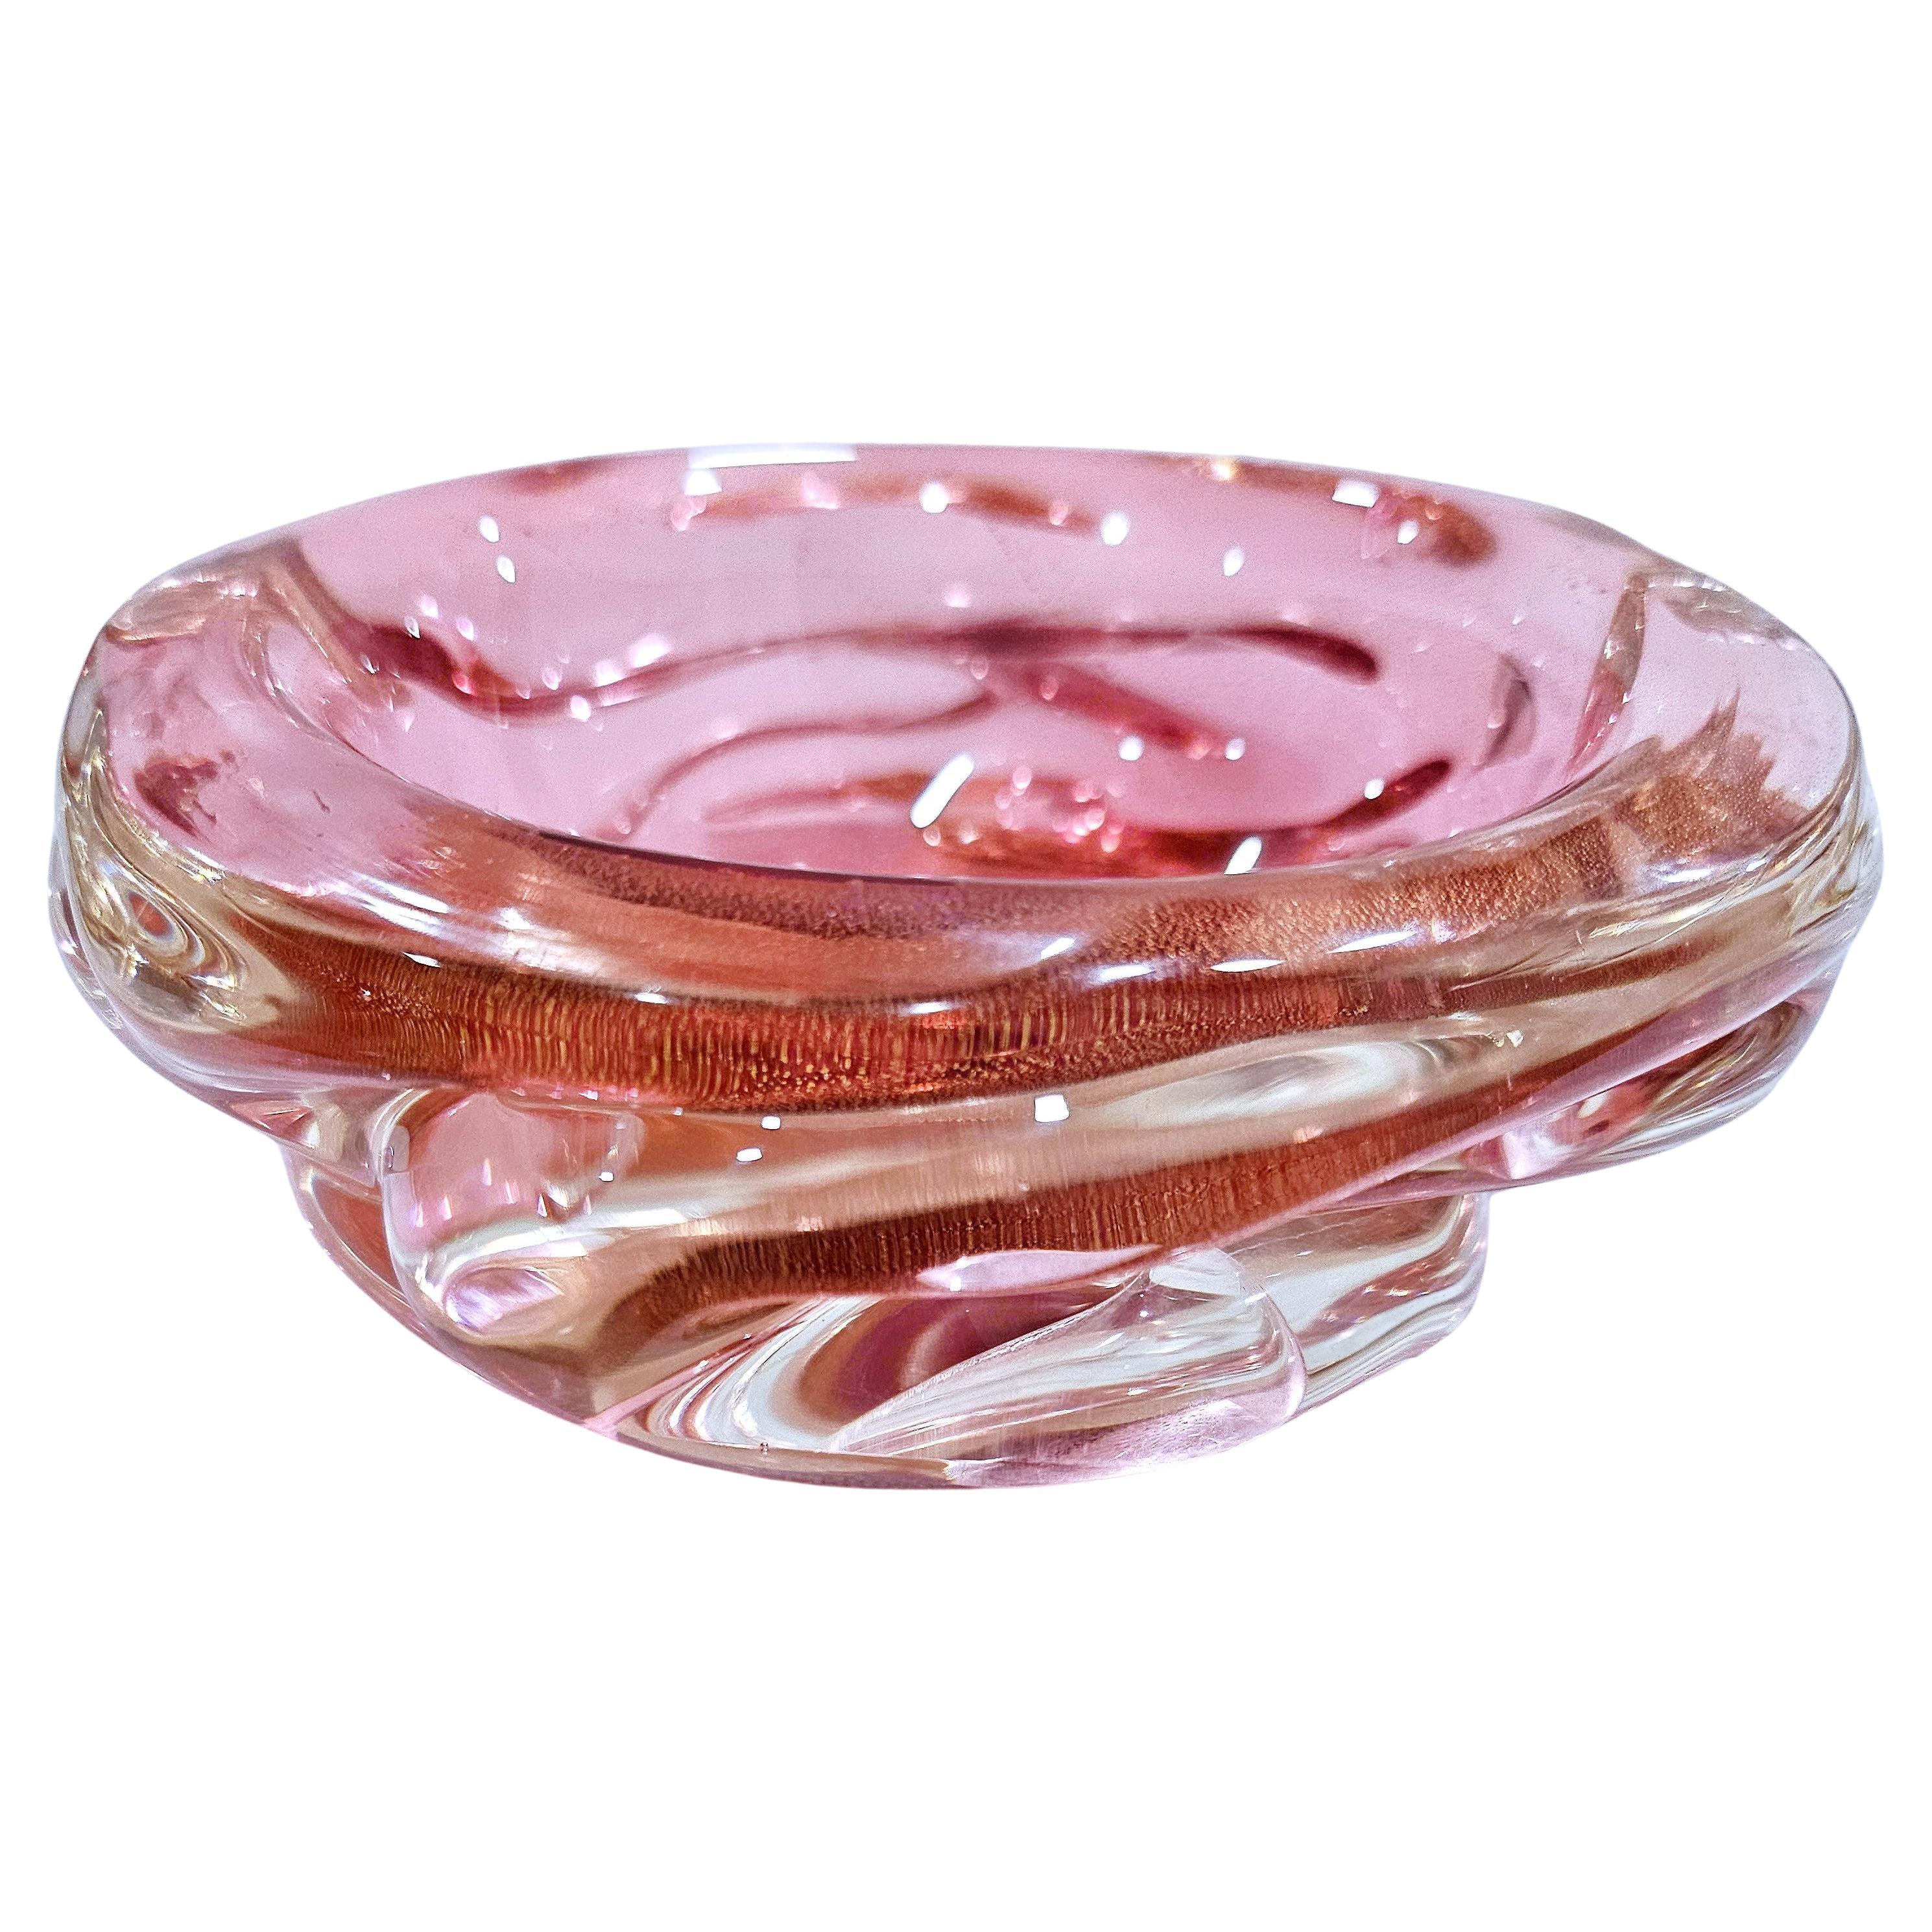 Archimede Seguso Murano Glass Bowl, A Bugne, Transparent Red with Gold Polveri